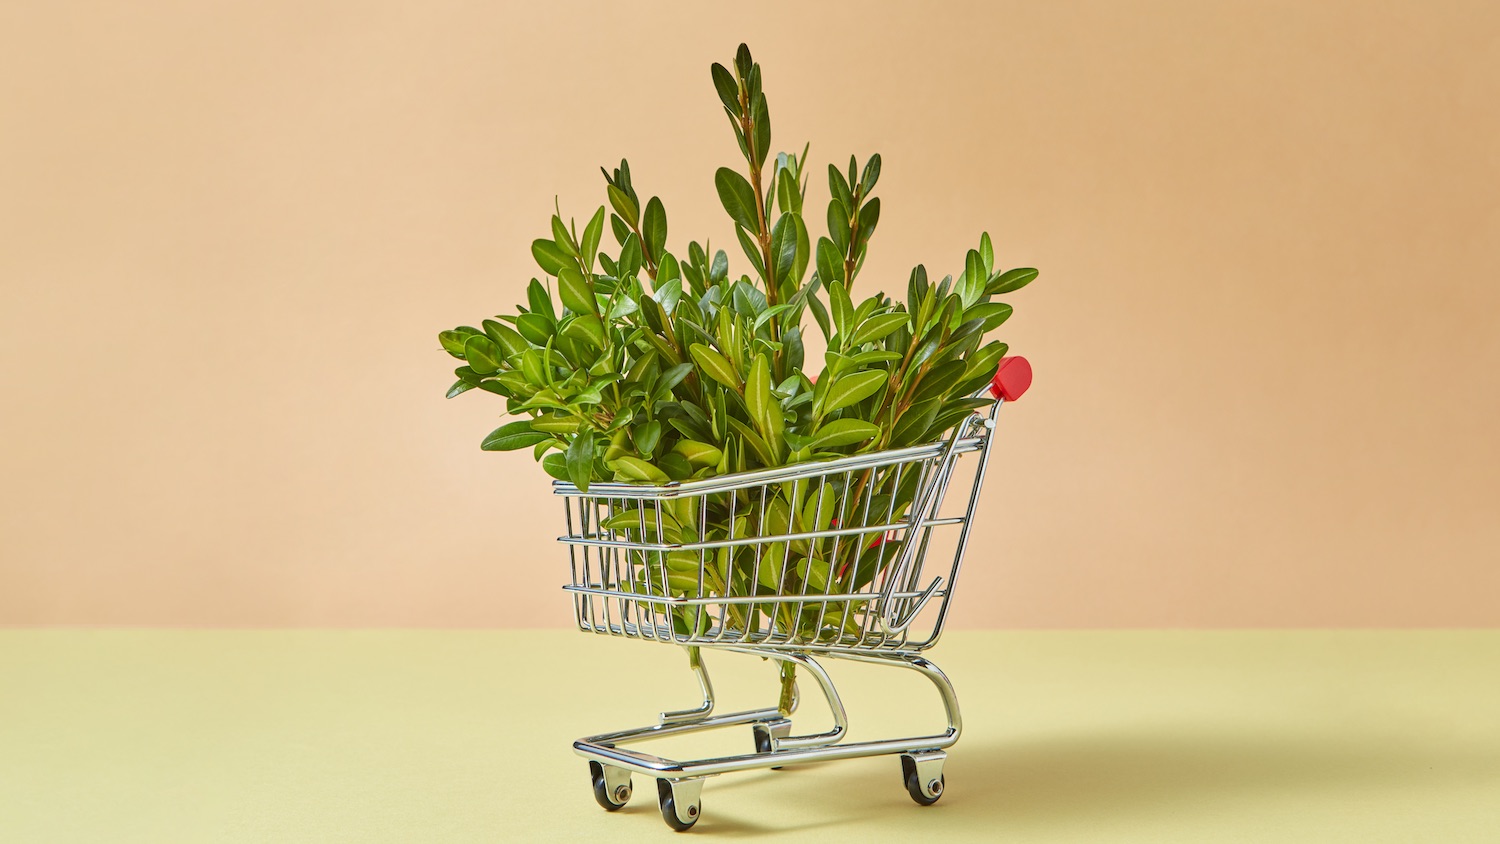 Sustainability in Commerce: Grow While Staying Green | Salesforce